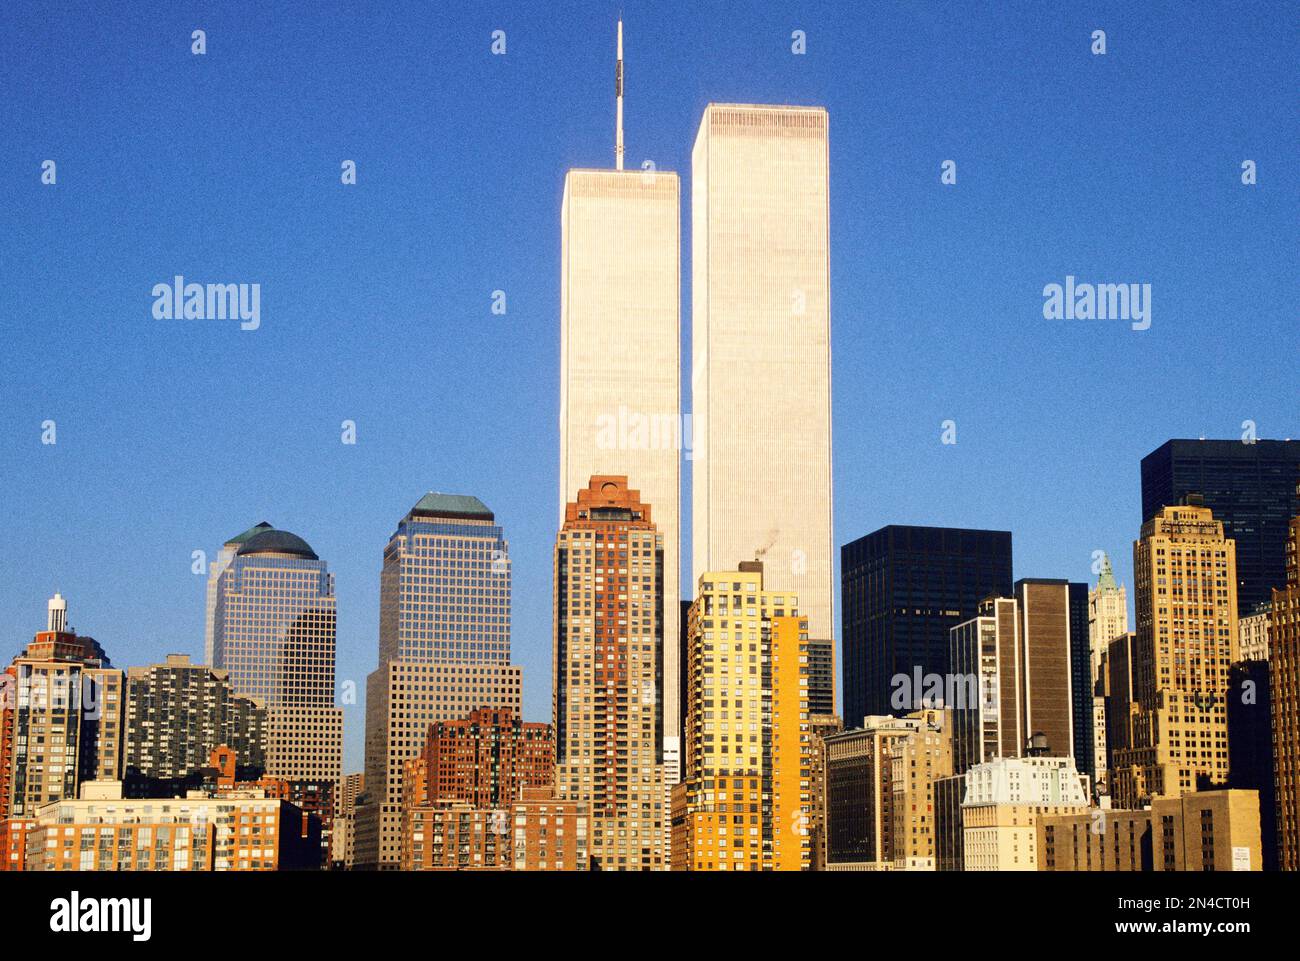 World Trade Center or Twin Towers before 9/11. New York City downtown buildings on Lower Manhattan skyline before September 2001 attack 1970's Stock Photo